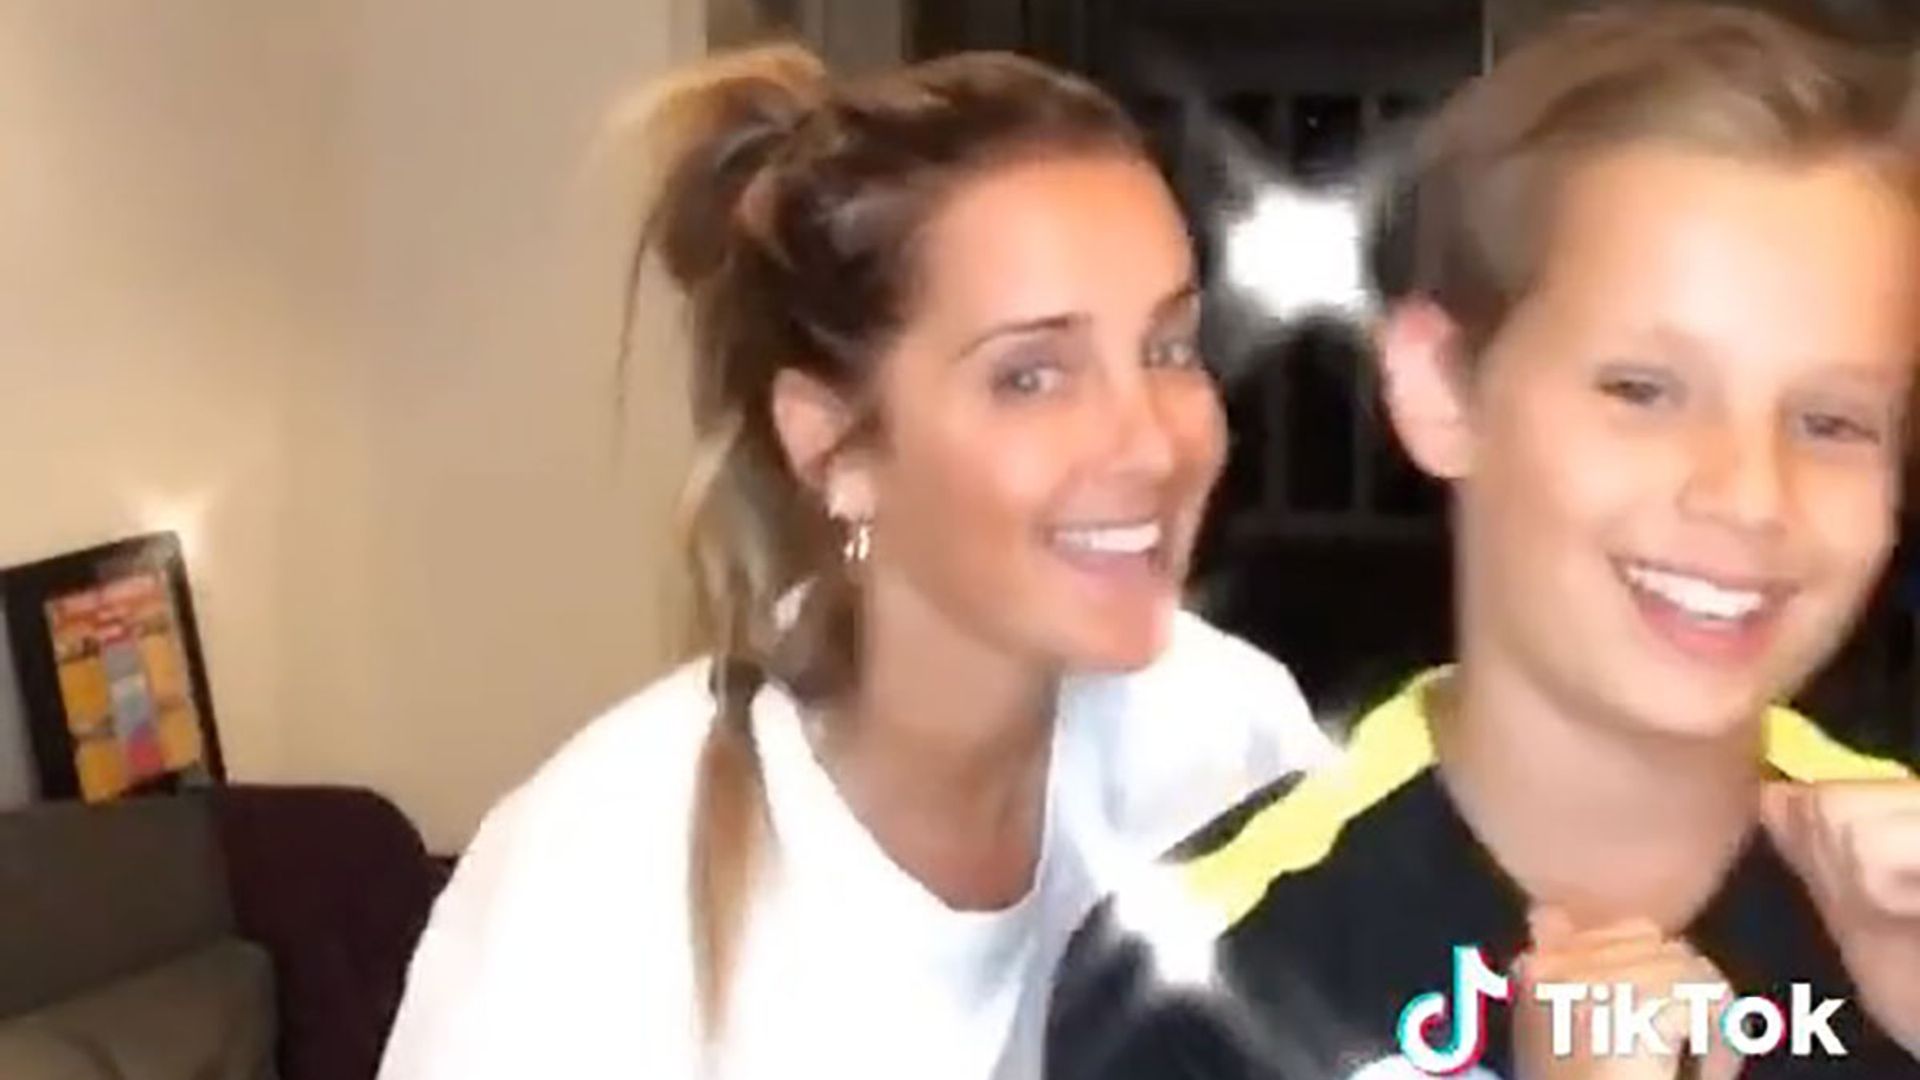 Louise Redknapp delights fans as youngest son Beau joins her in sweet dance video